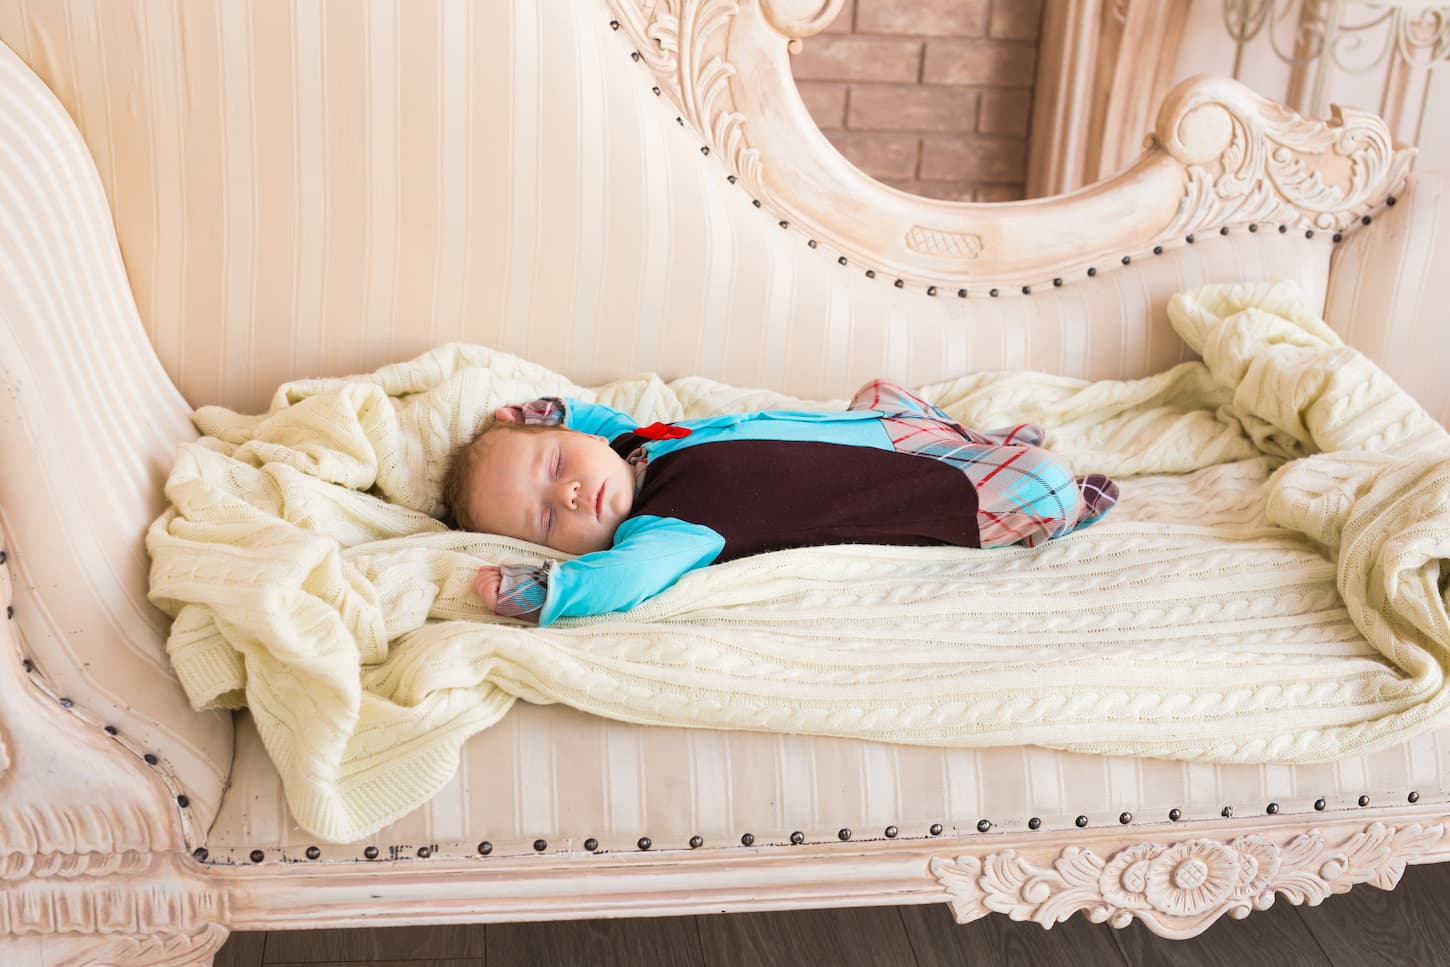 An image of a sleeping newborn baby on a blanket indoors.